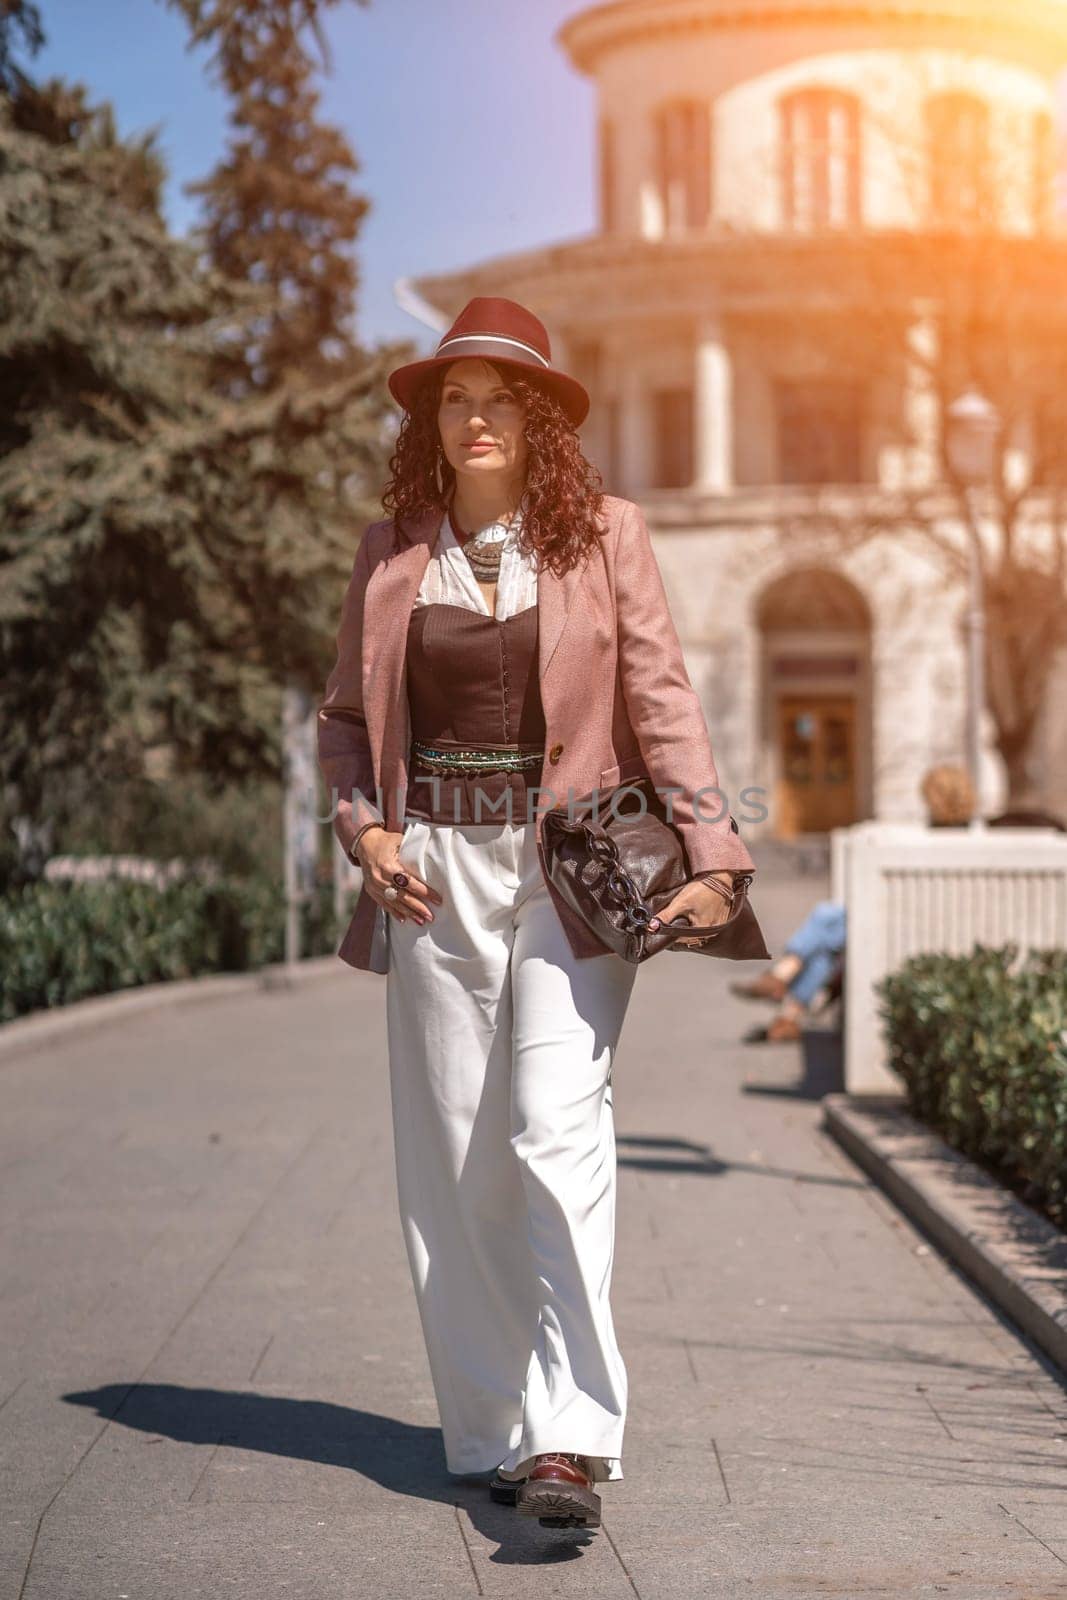 Woman park city. Stylish woman in a hat walks in a park in the city. Dressed in white corset trousers and a pink jacket with a bag in her hands. by Matiunina